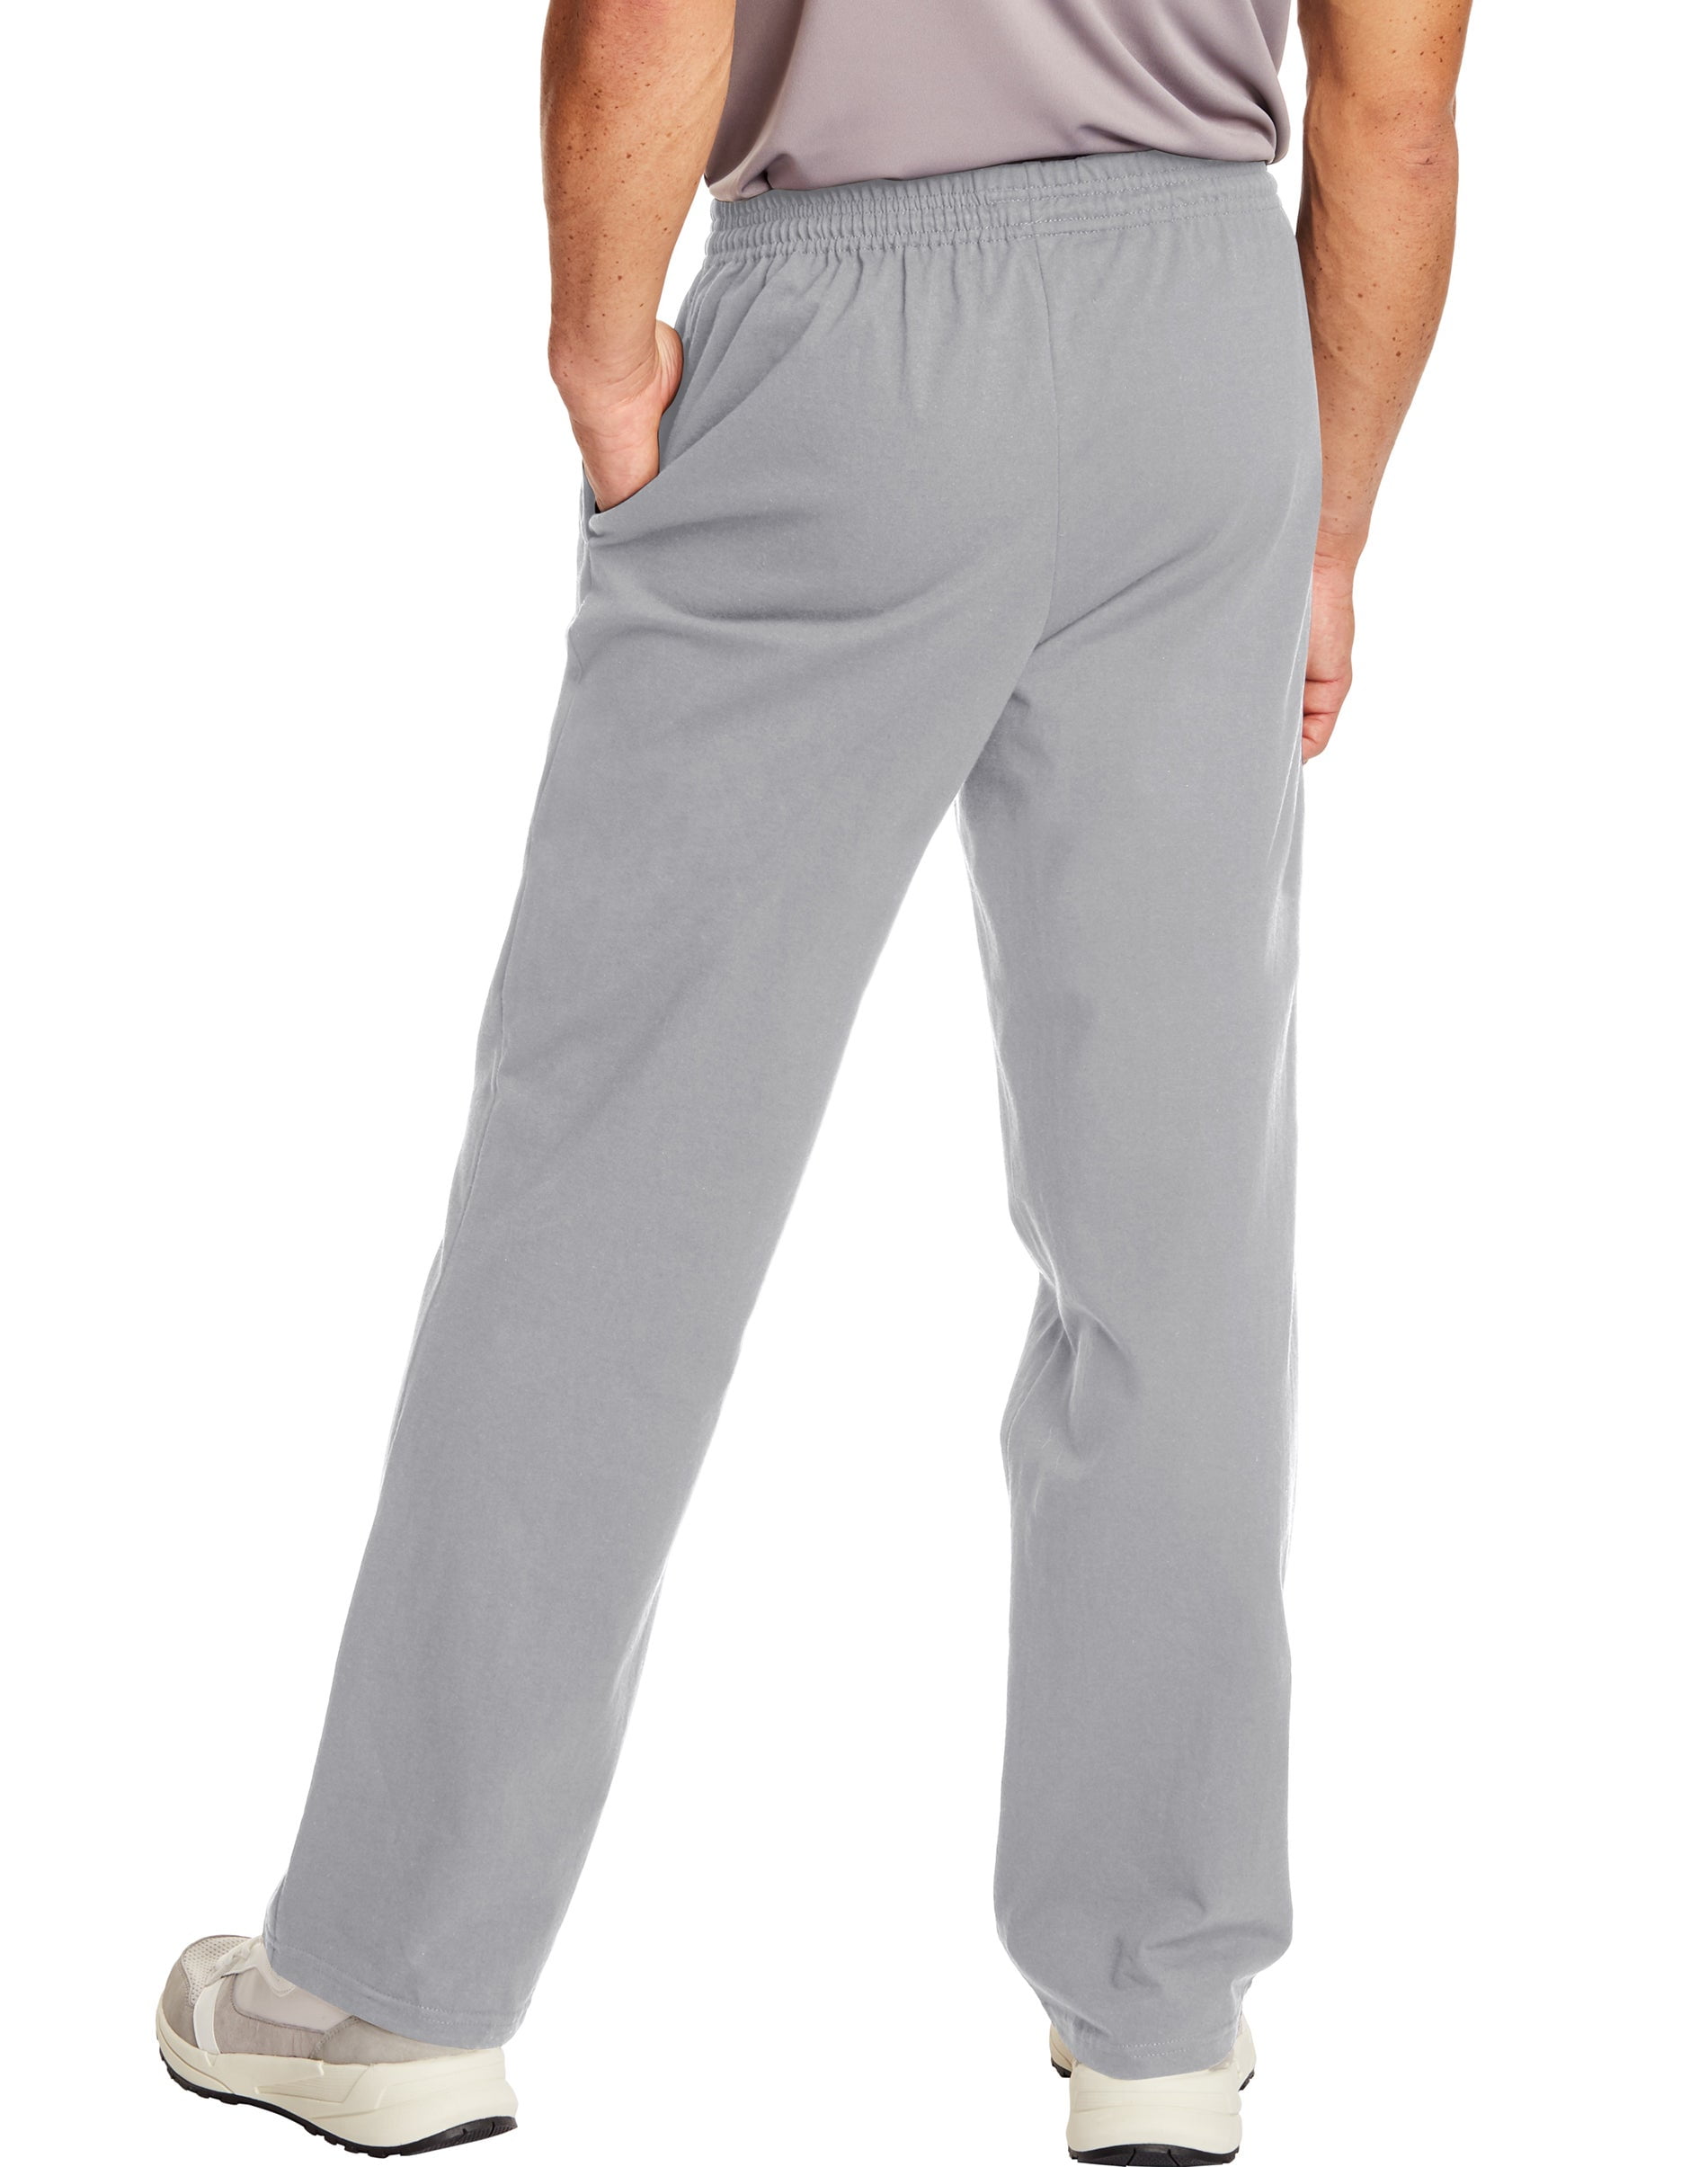 Hanes Men's and Big Men's X-Temp Jersey Pants, Up to Size 3XL 